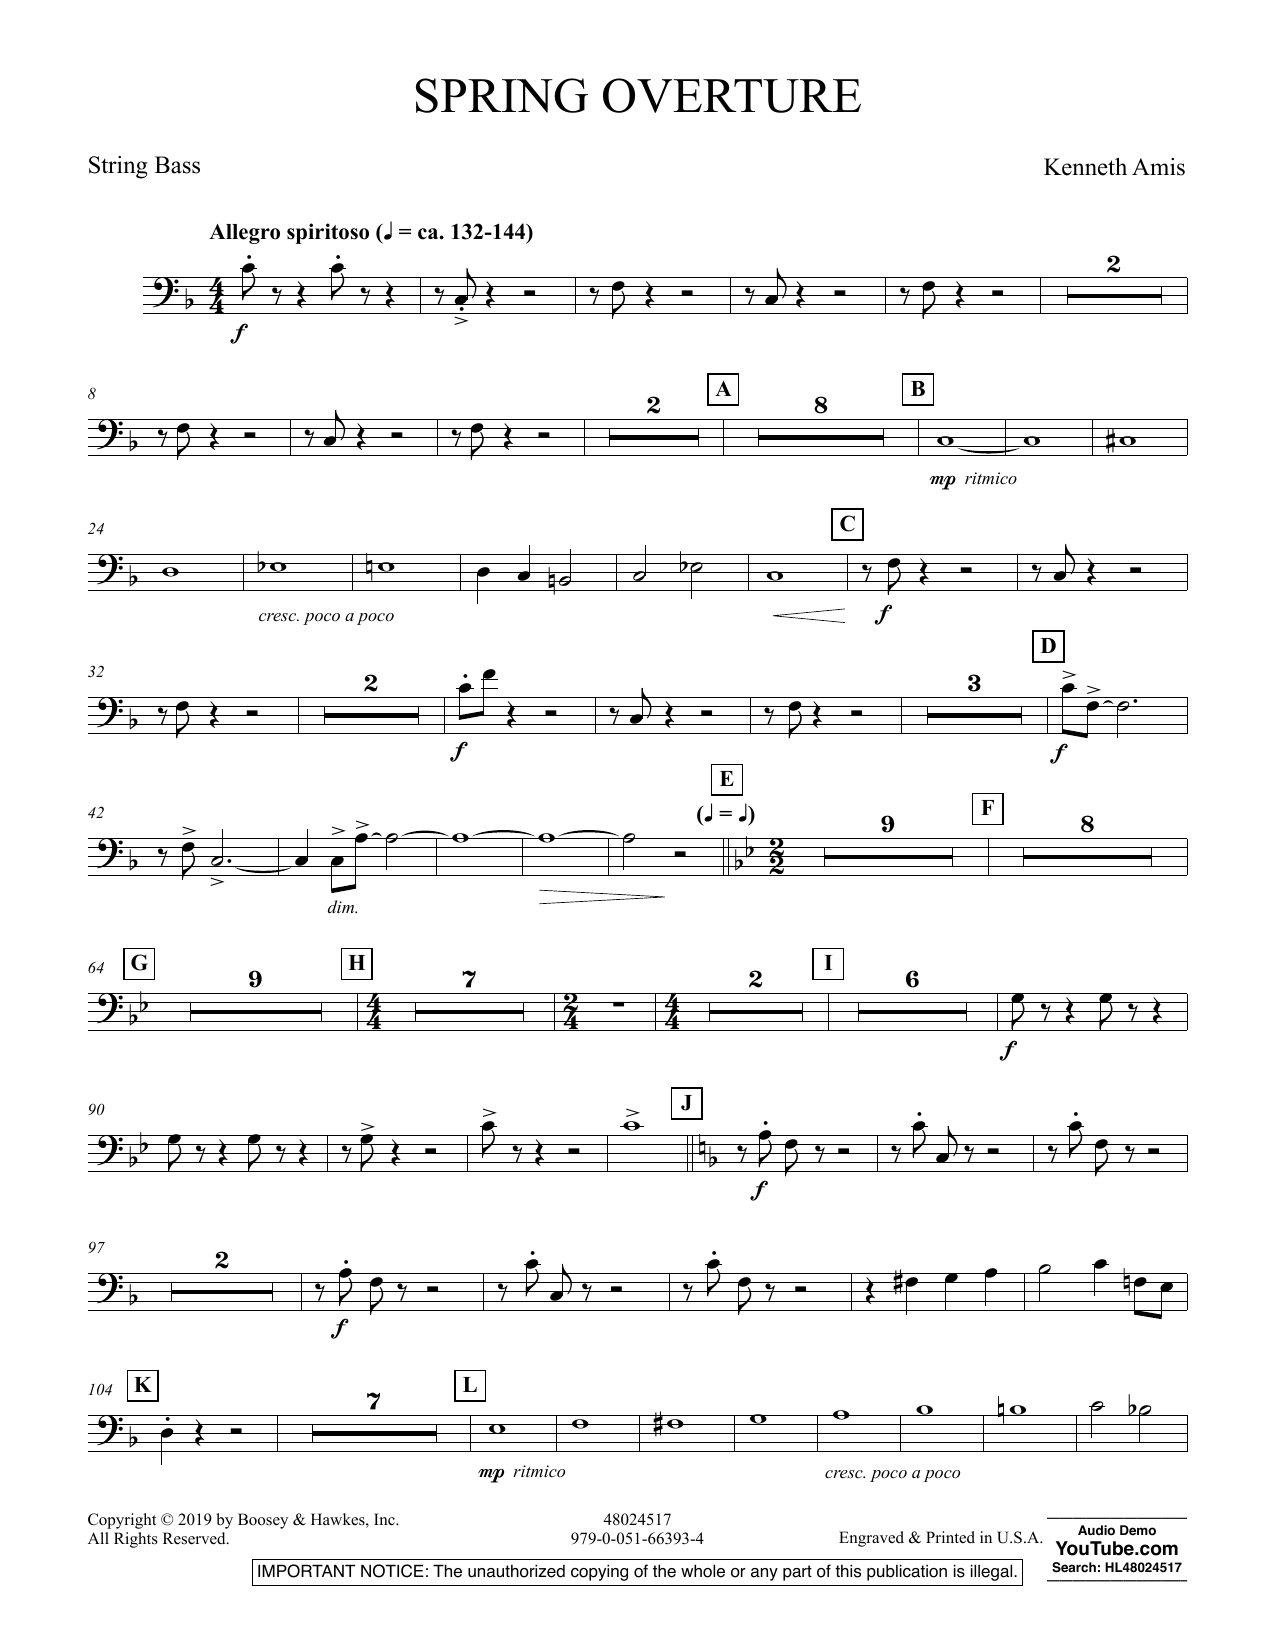 Kenneth Amis Spring Overture - String Bass sheet music preview music notes and score for Concert Band including 2 page(s)